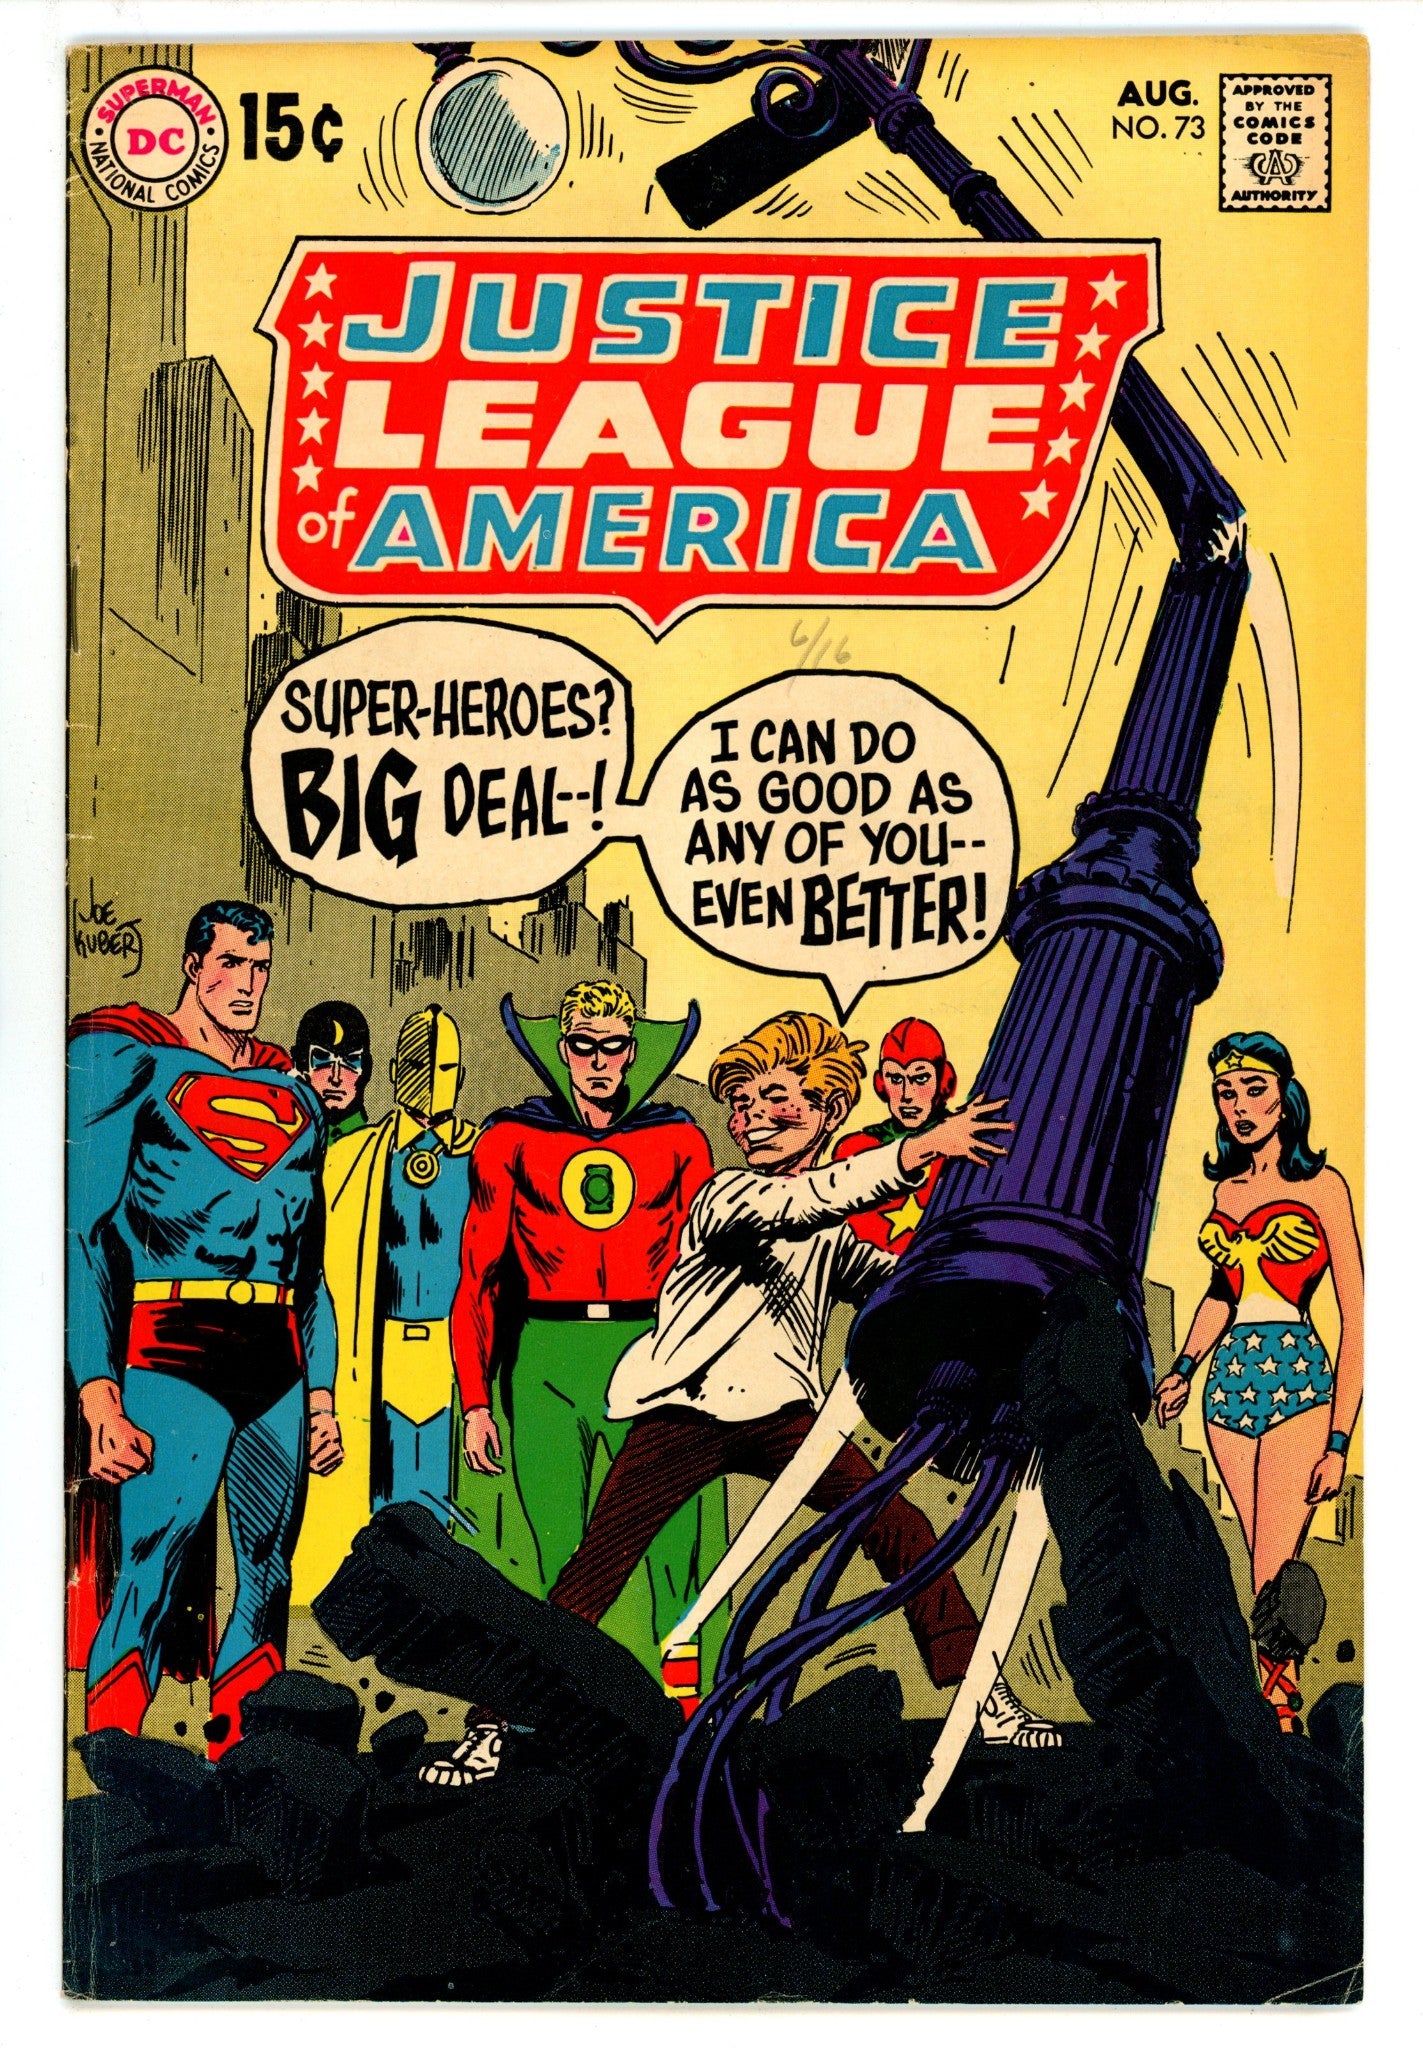 Justice League of America Vol 1 73 VG/FN (5.0) (1969) 